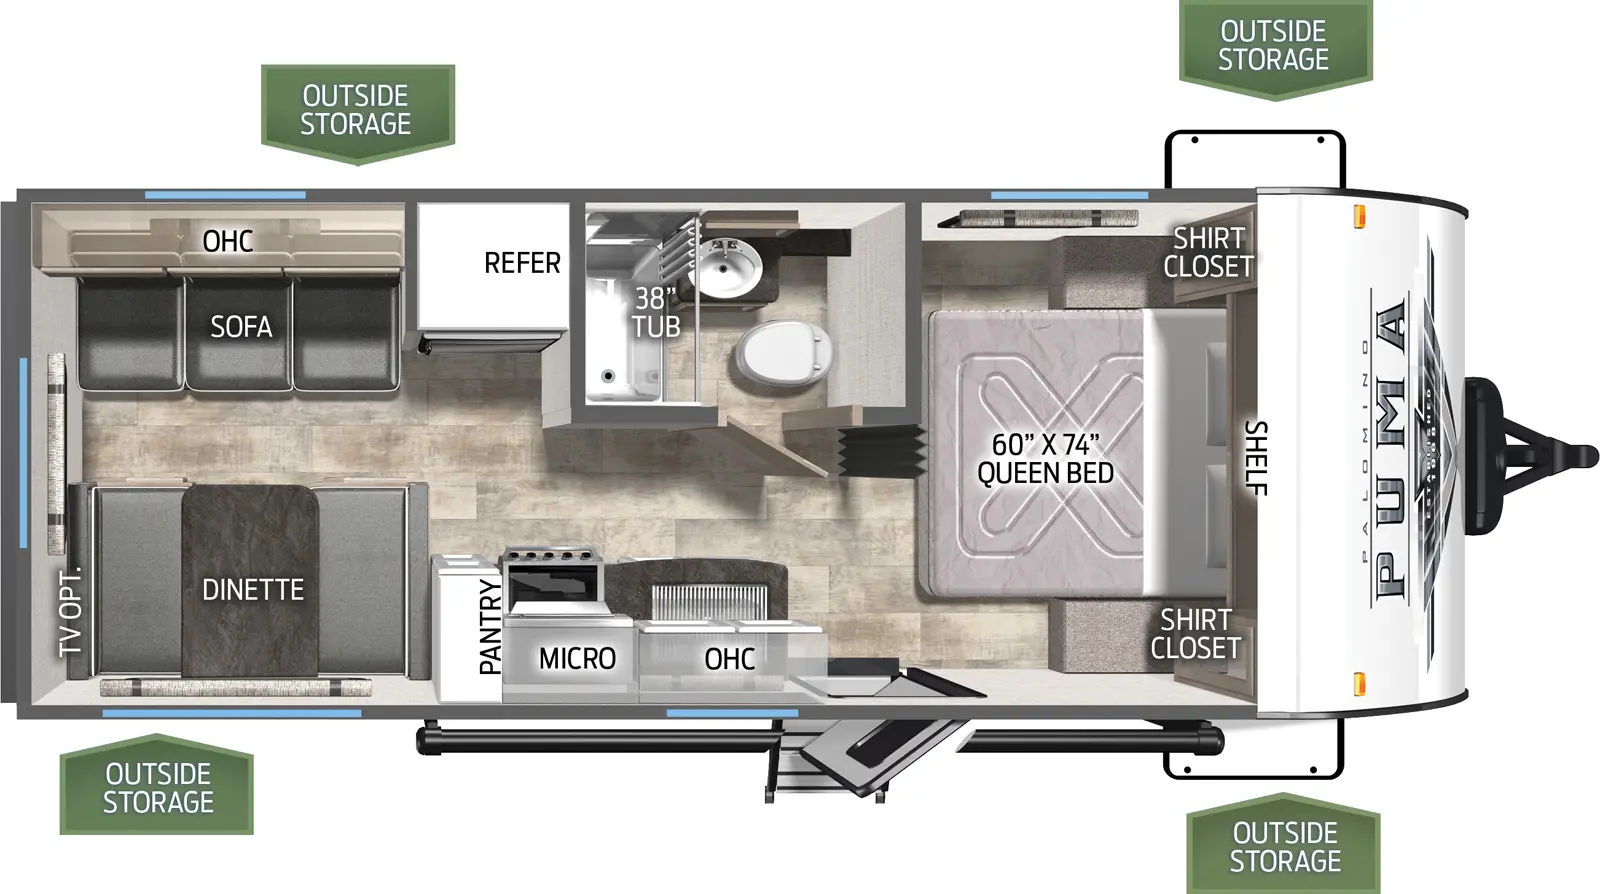 The 20RLX has no slide outs. Exterior features include a 10 foot awning. Interior layout from the front to back: queen bed with two shirt closets; full bathroom; kitchen with microwave, cooktop stove and pantry; refrigerator on the off door side; sofa; booth dinette.
